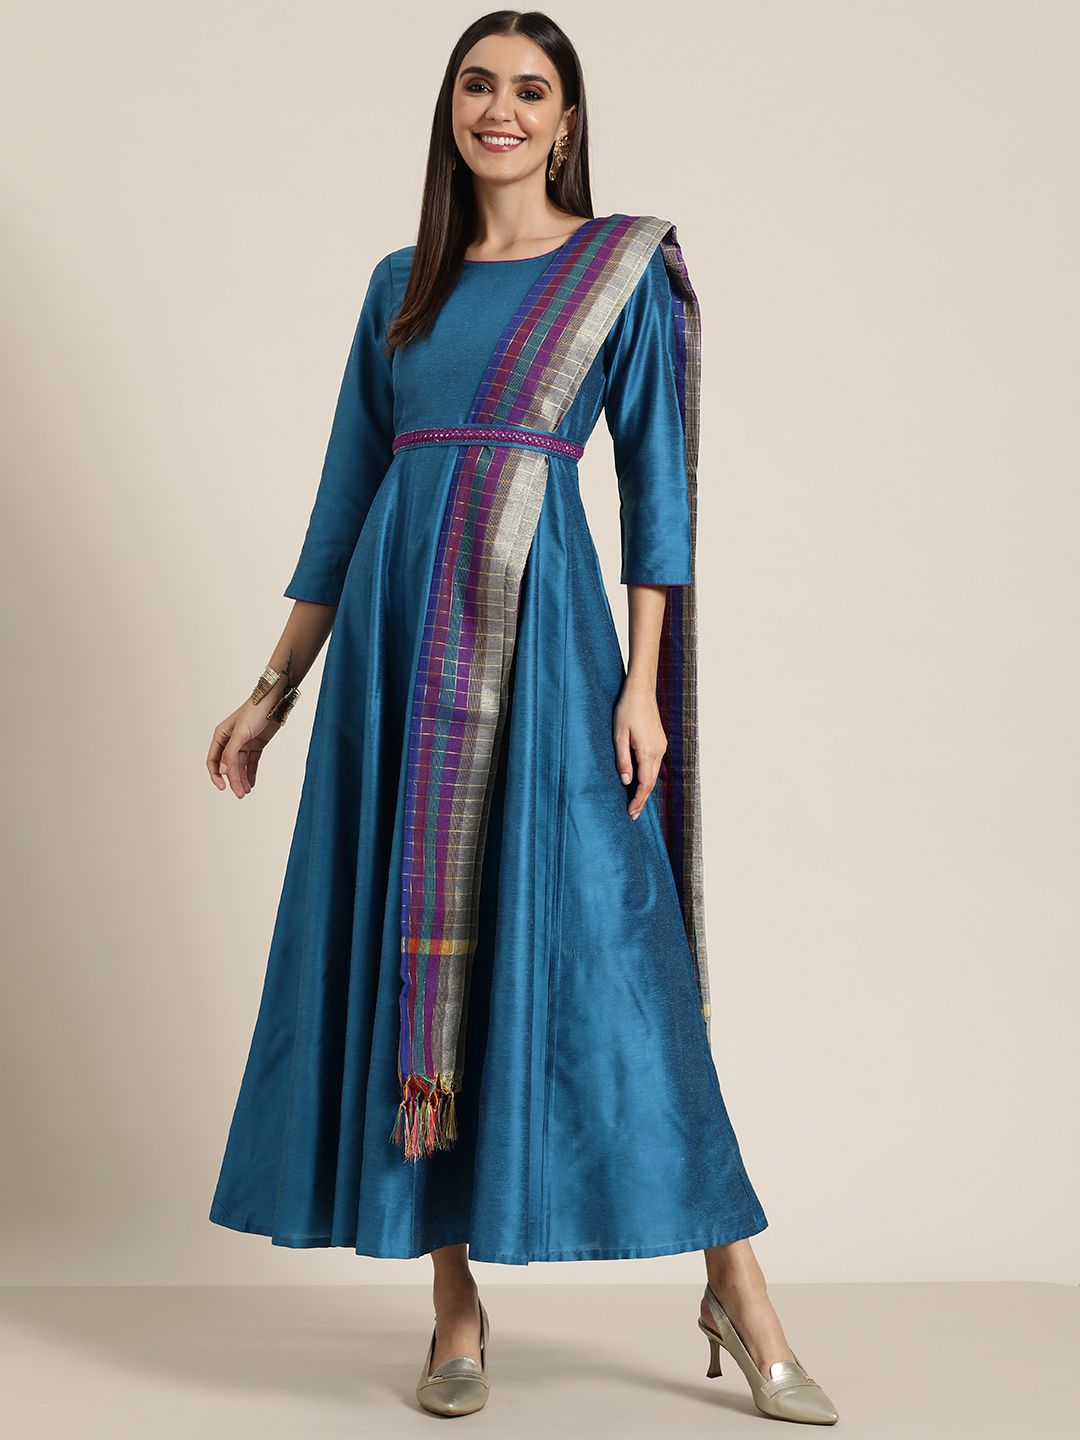 Shae by SASSAFRAS Blue & Purple Ethnic A-Line Maxi Dress Price in India